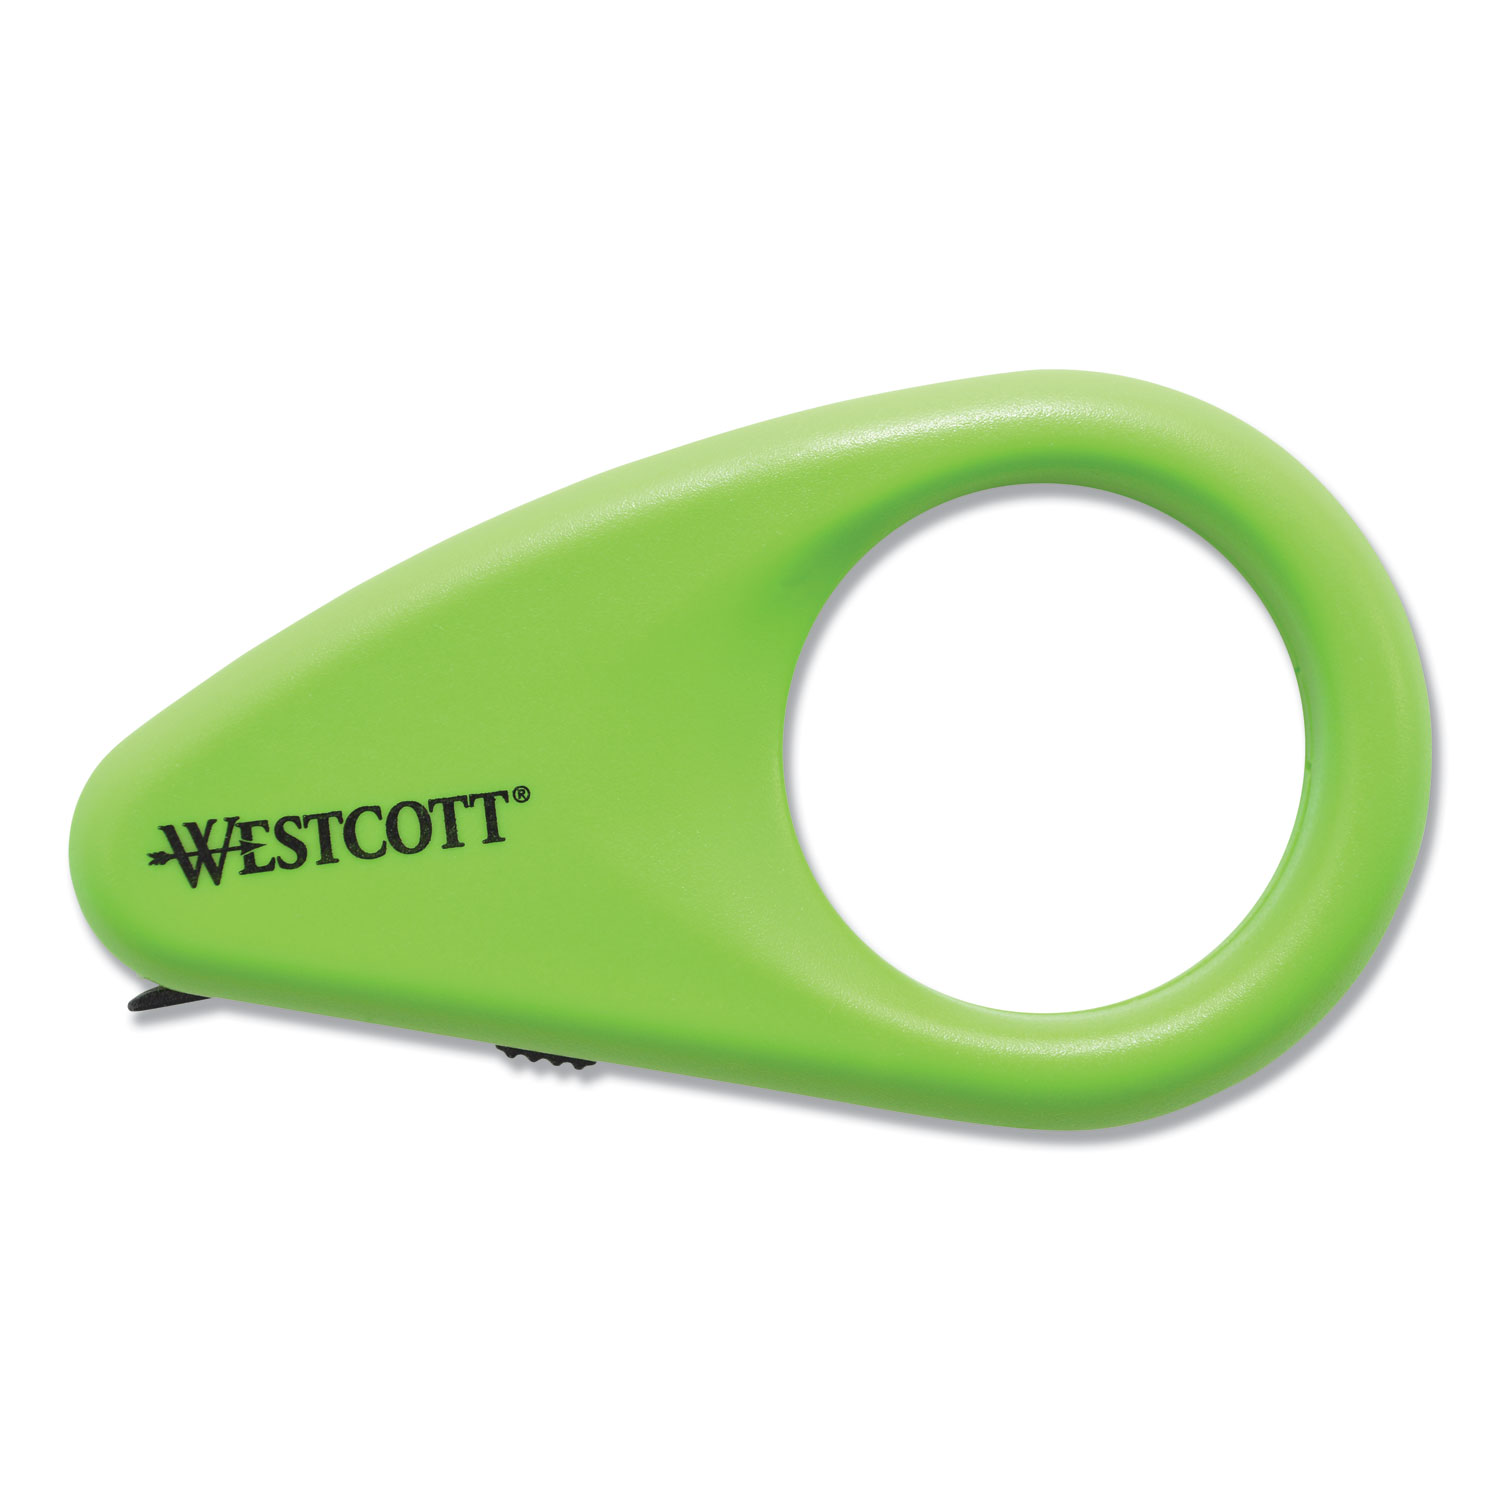 Compact Safety Ceramic Blade Box Cutter by Westcott® ACM16473